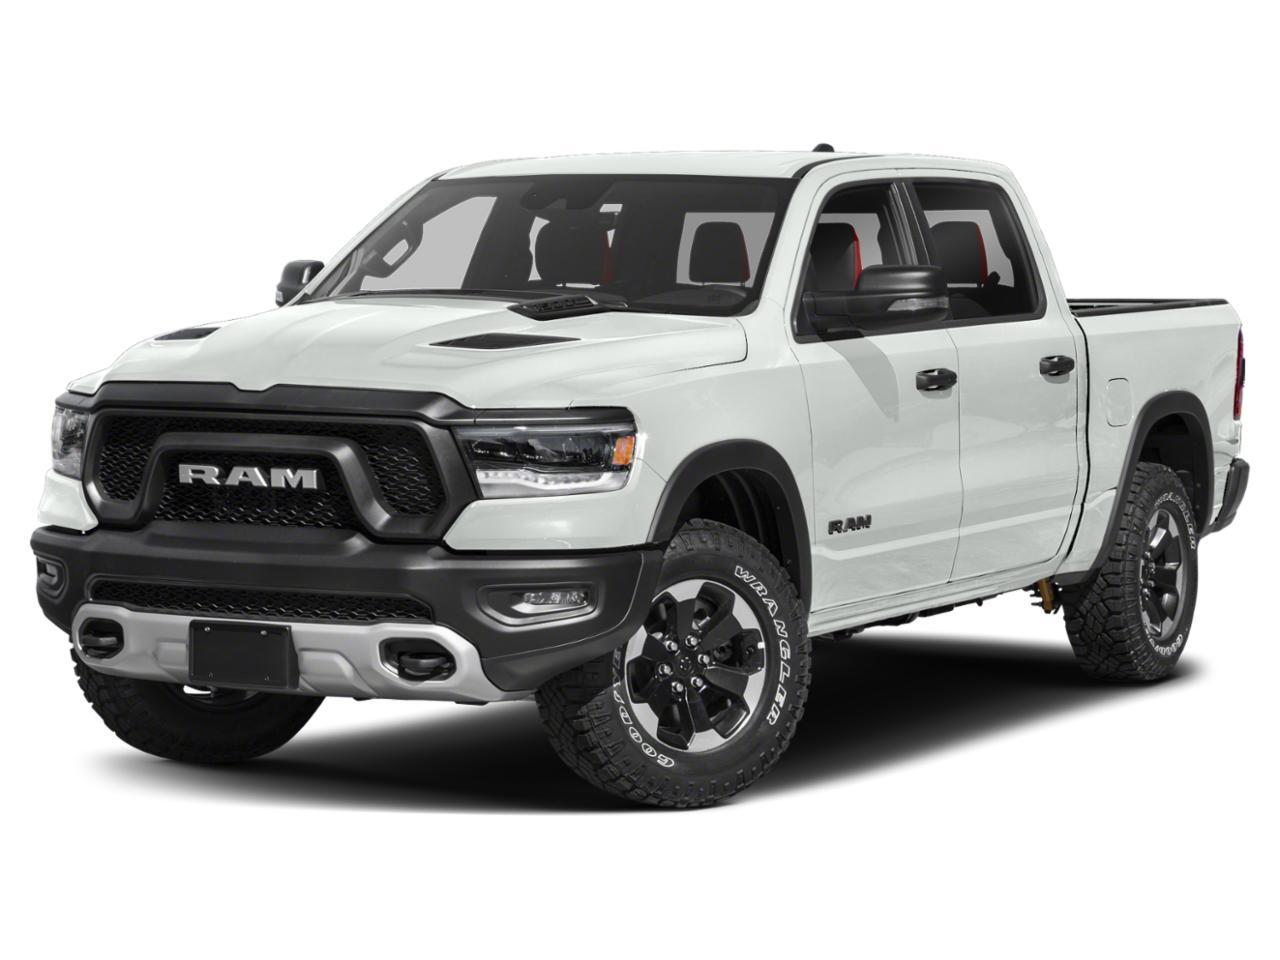 2022 Ram 1500 REBEL GT IN BRIGHT WHITE EQUIPPED WITH A 5.7L HEMI